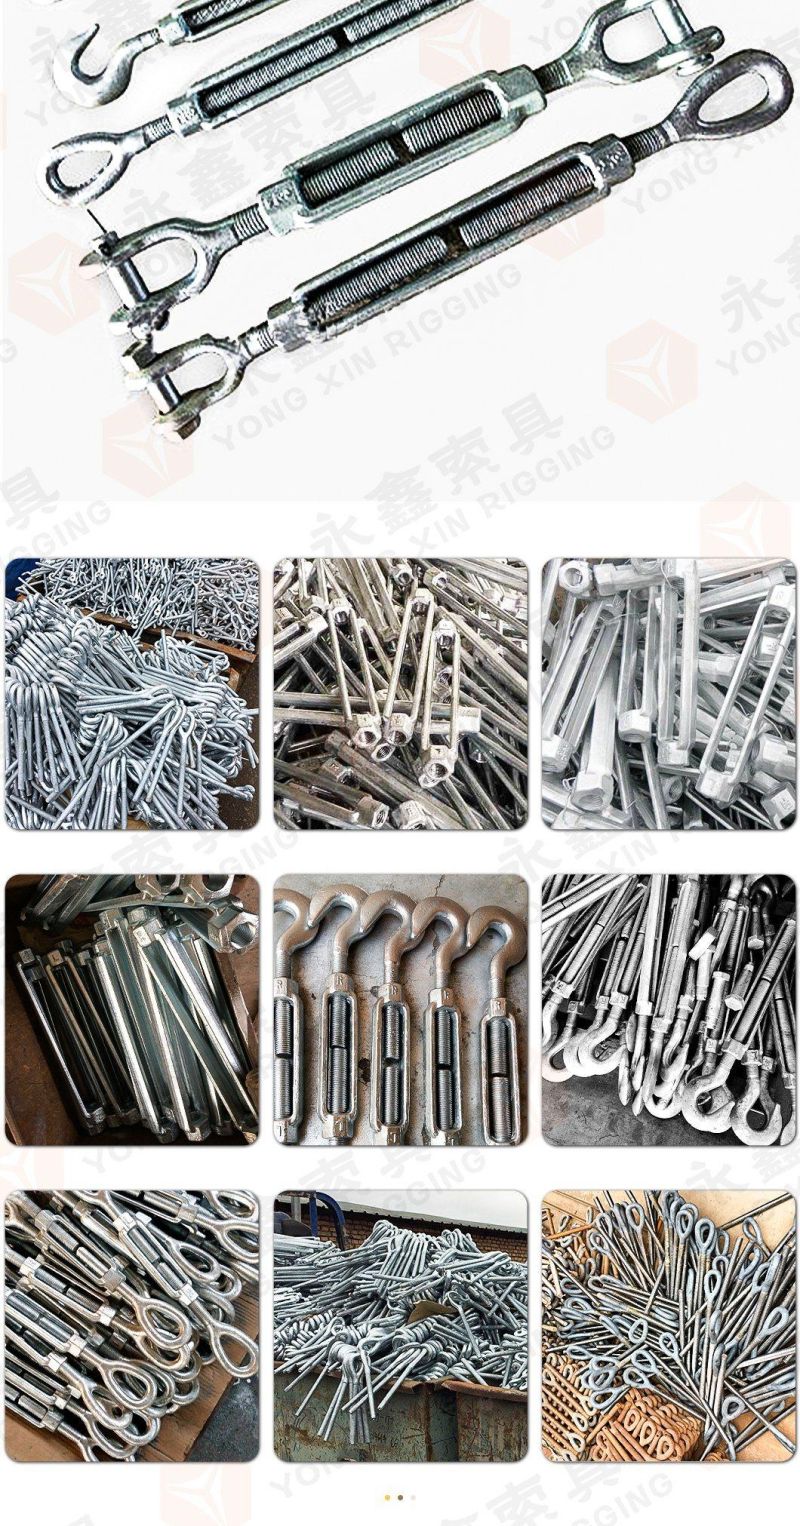 Swivel Steel Turnbuckles with Hook and Eye